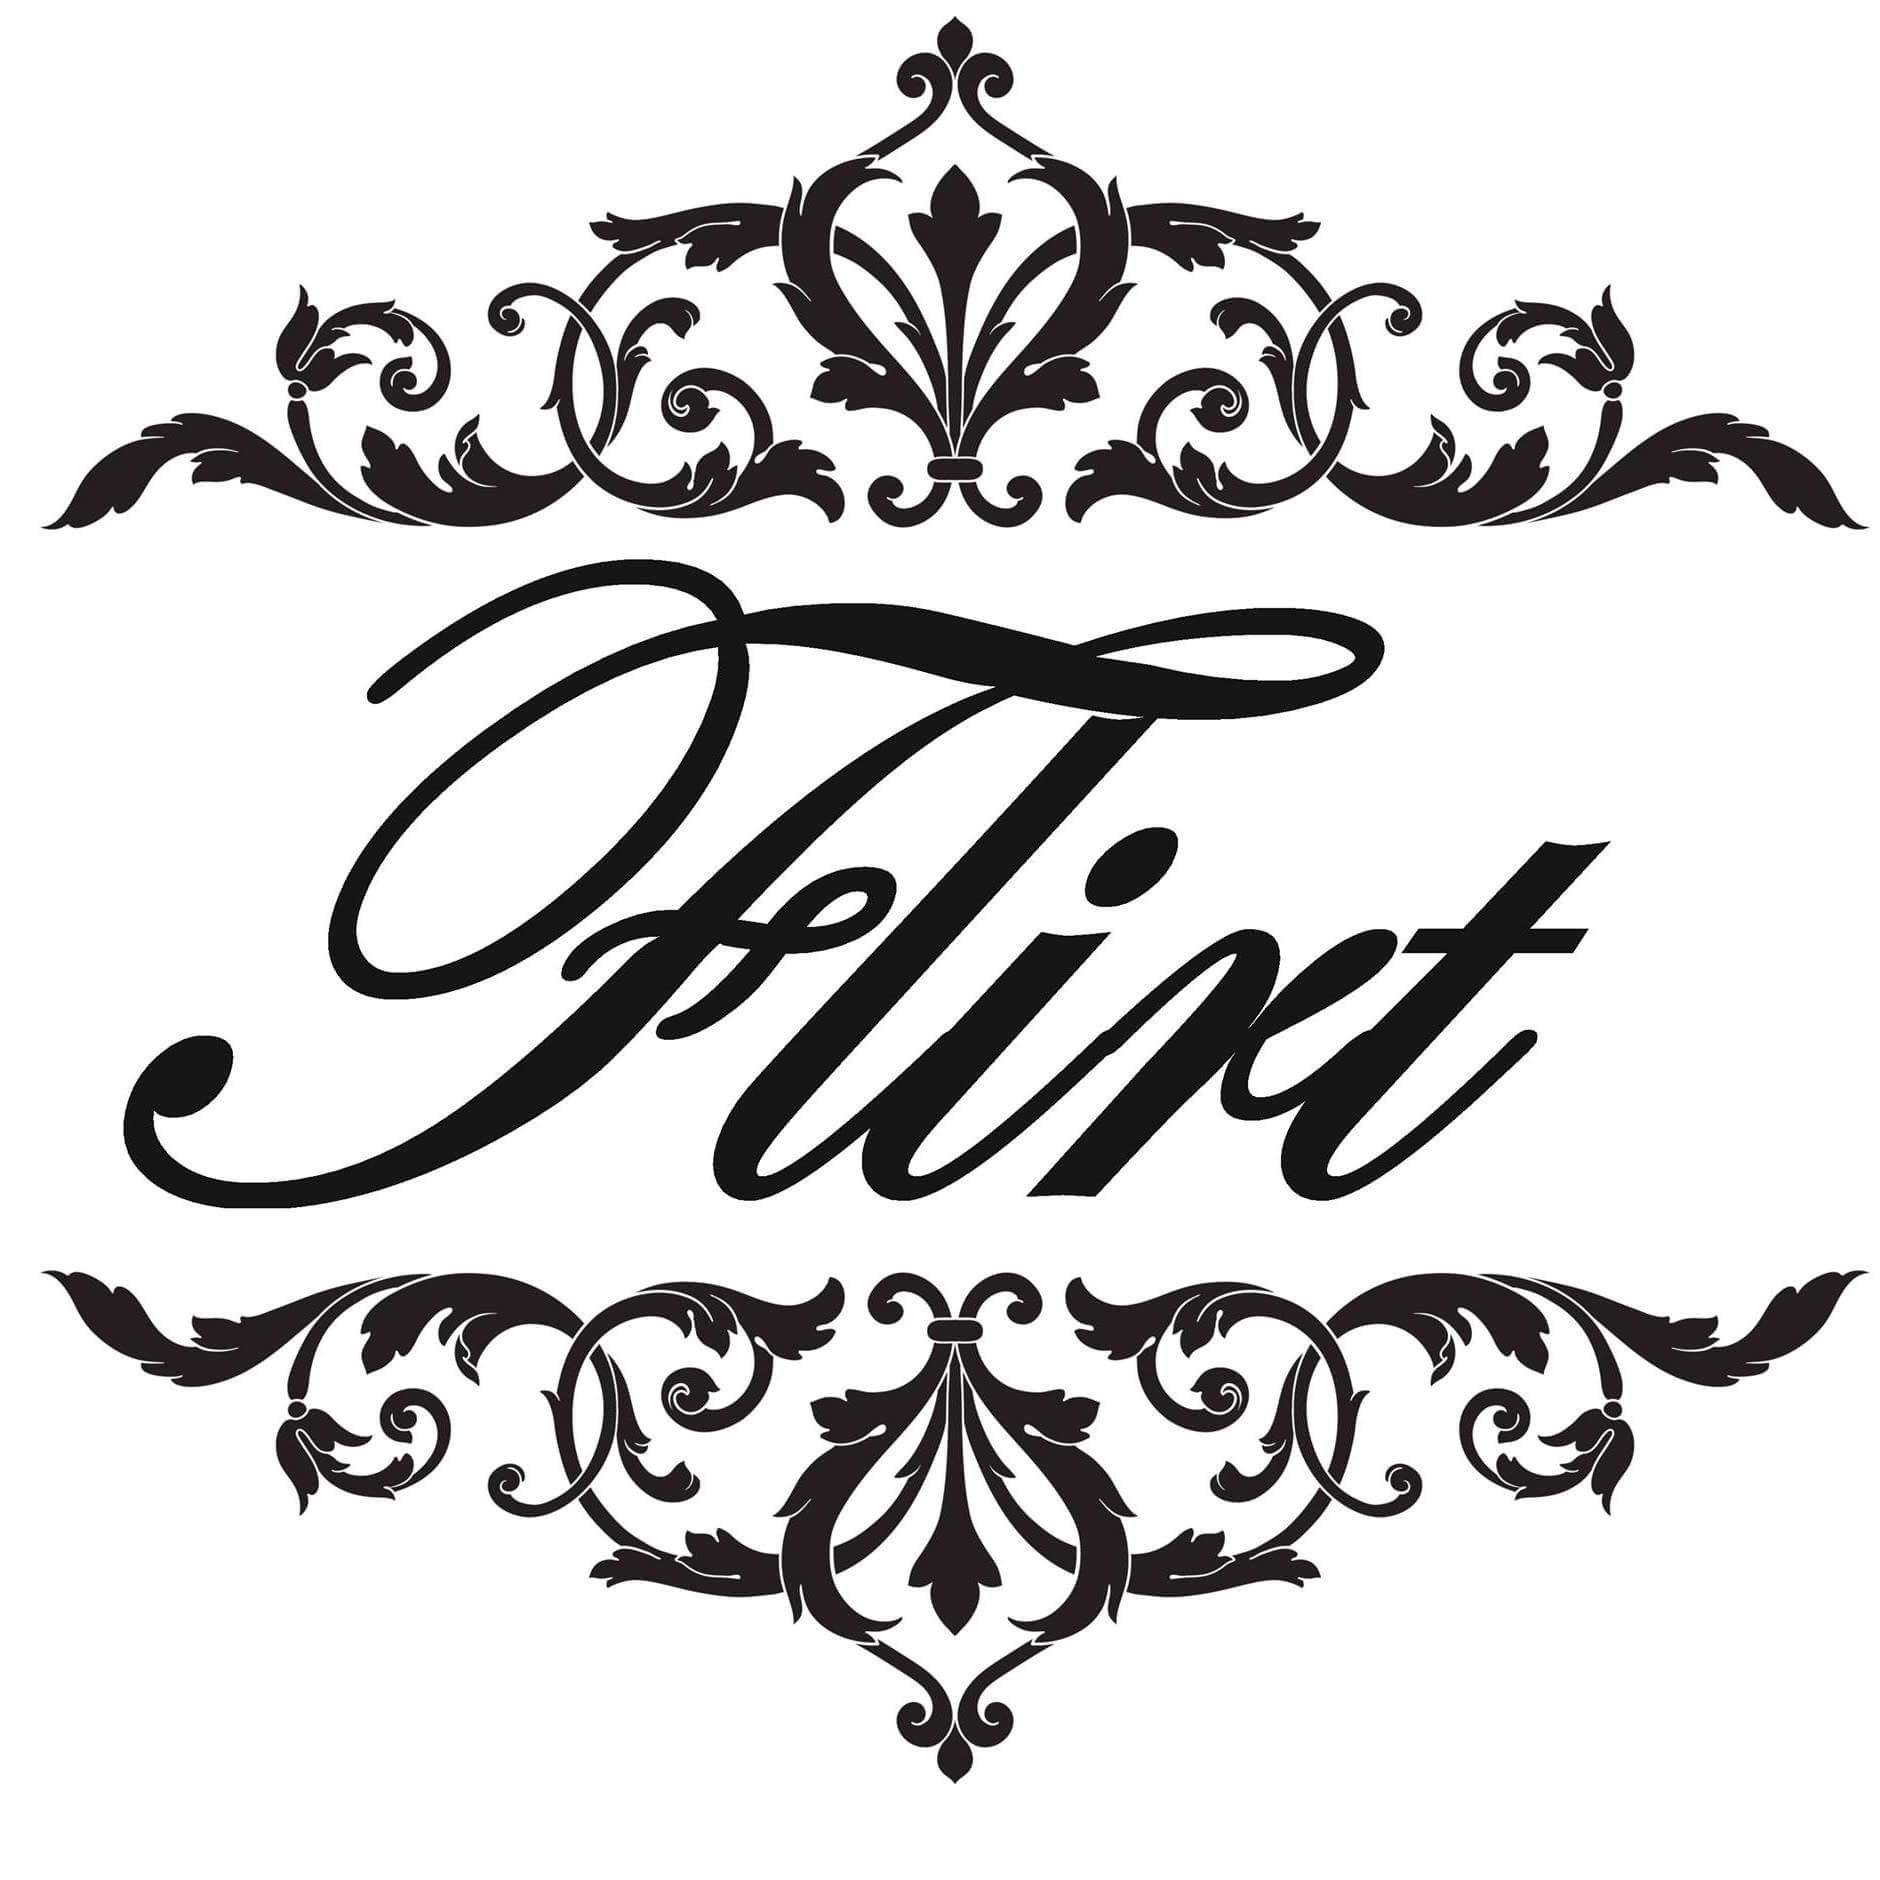 Flirt is a subscription box company featuring all the latest styles in beauty and fashion accessories!